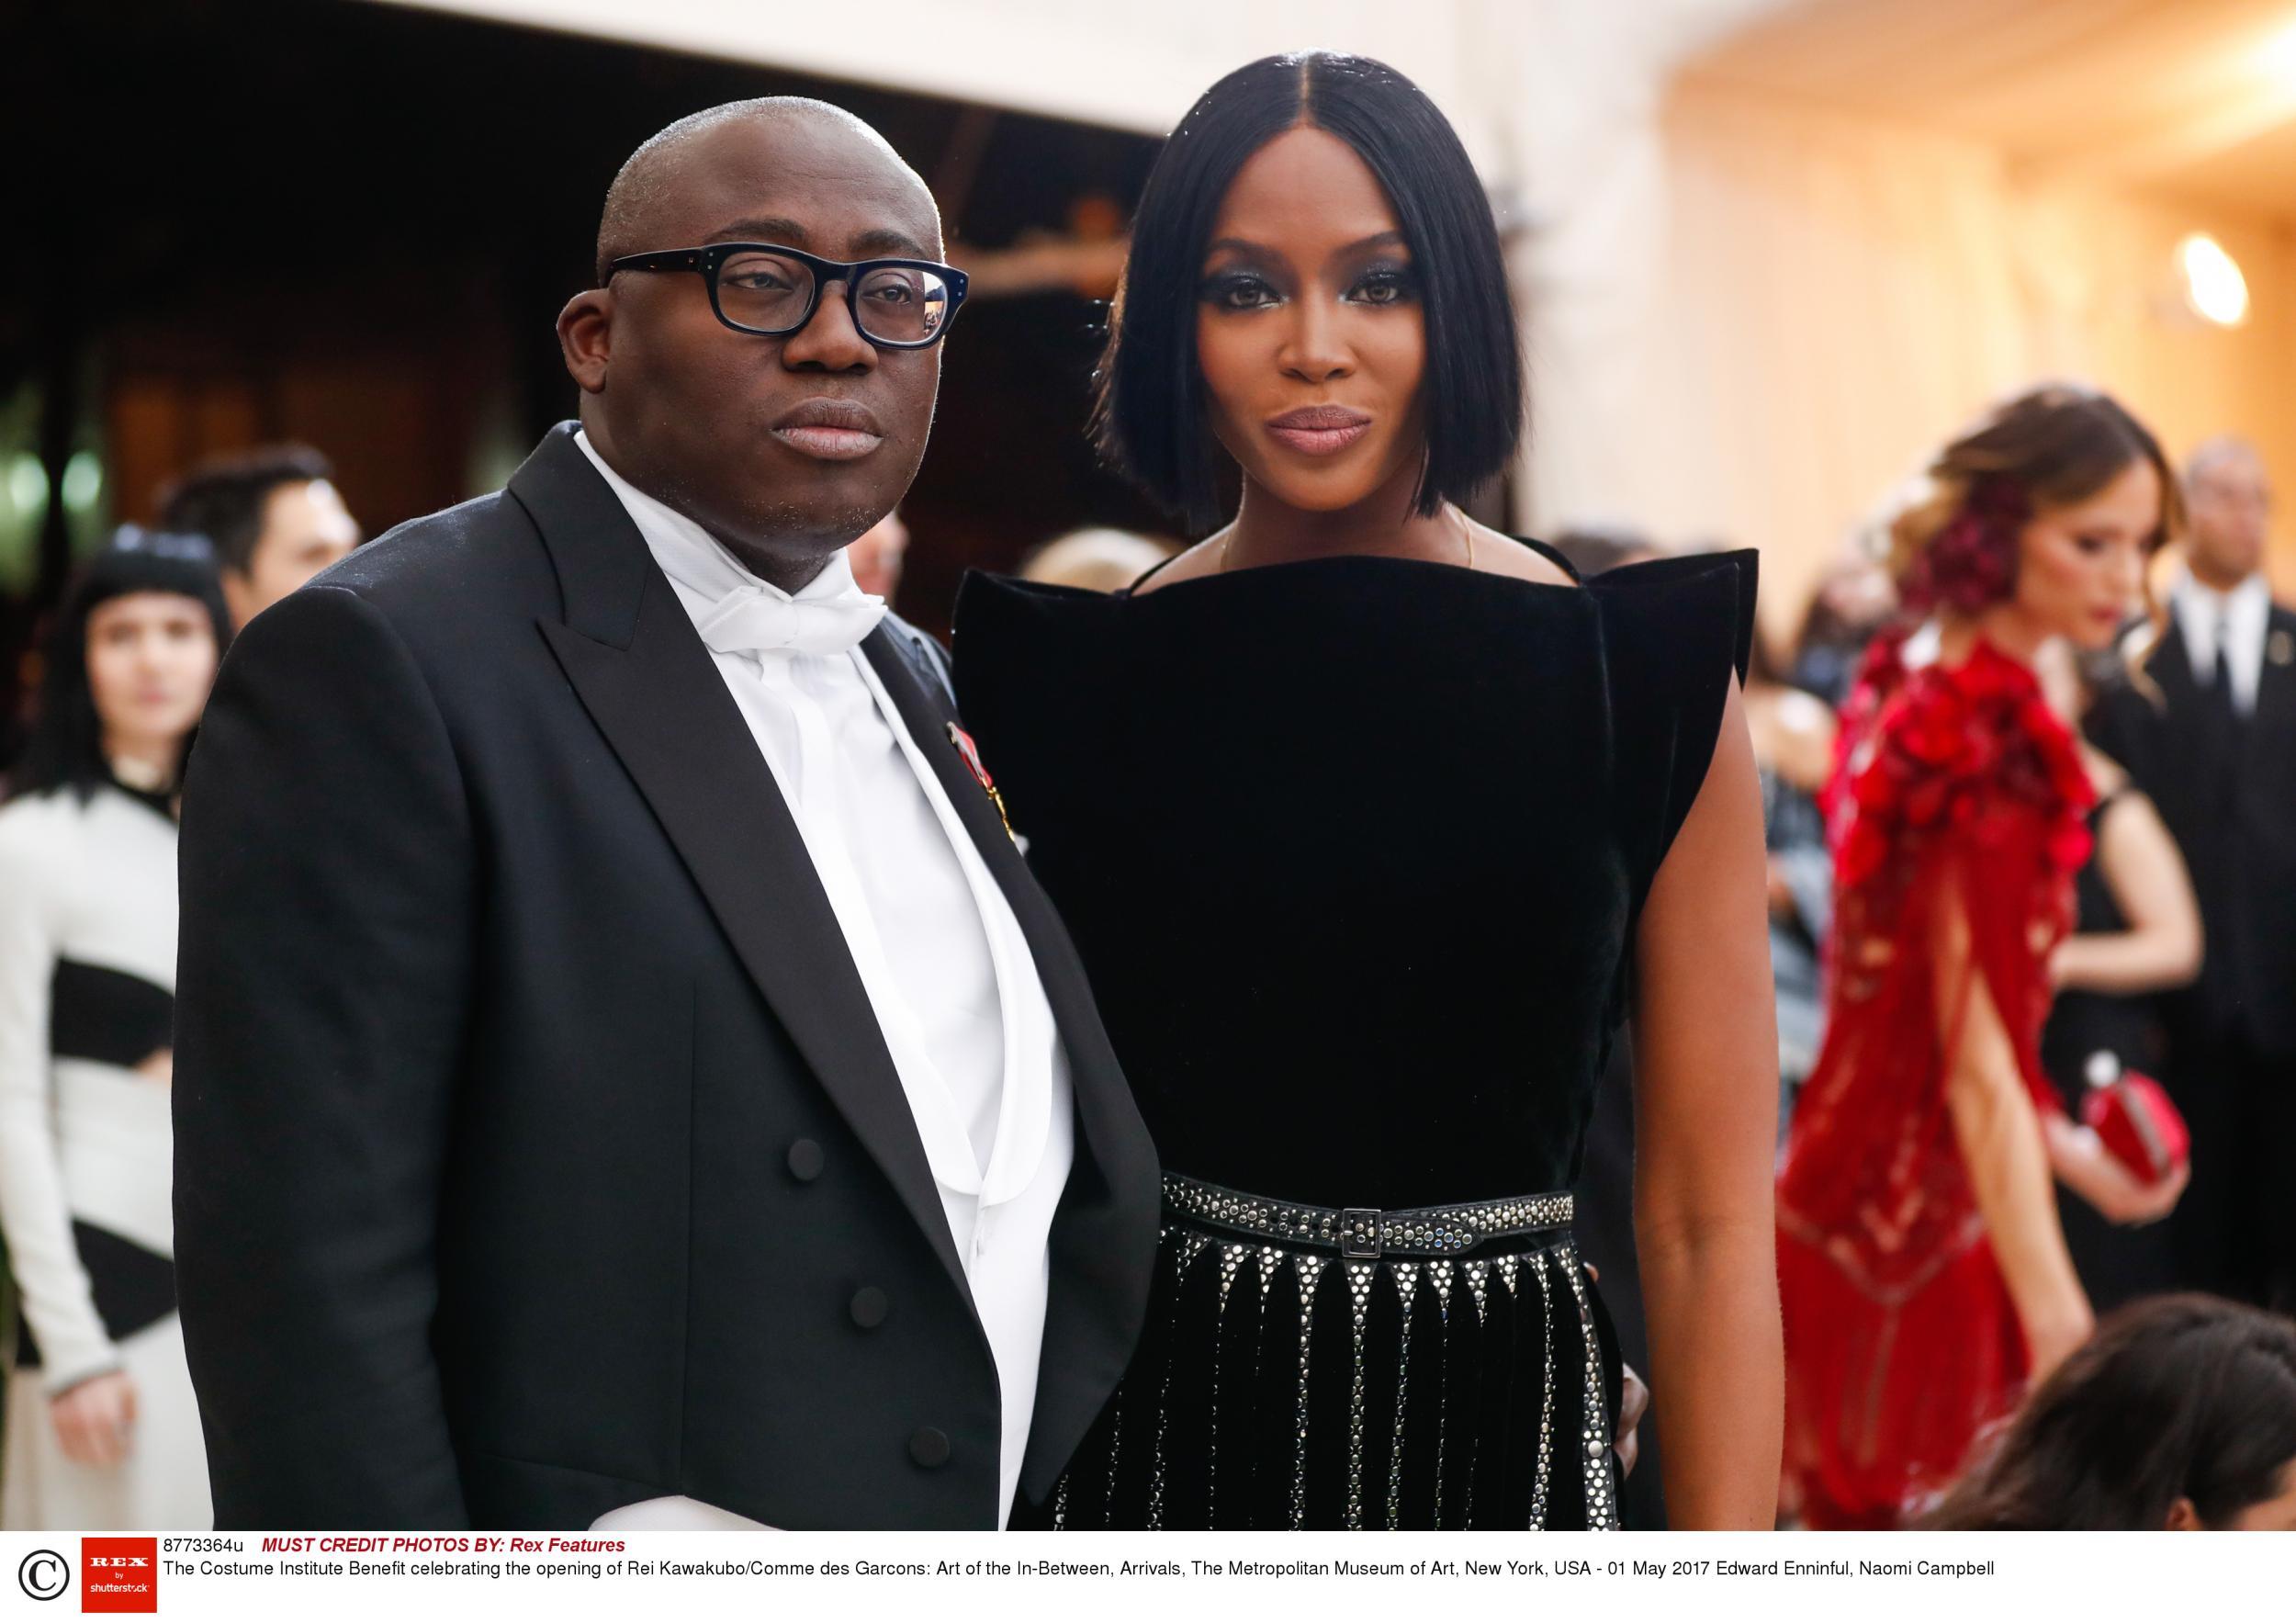 Enninful pictured with Campbell at this year's Met Gala.